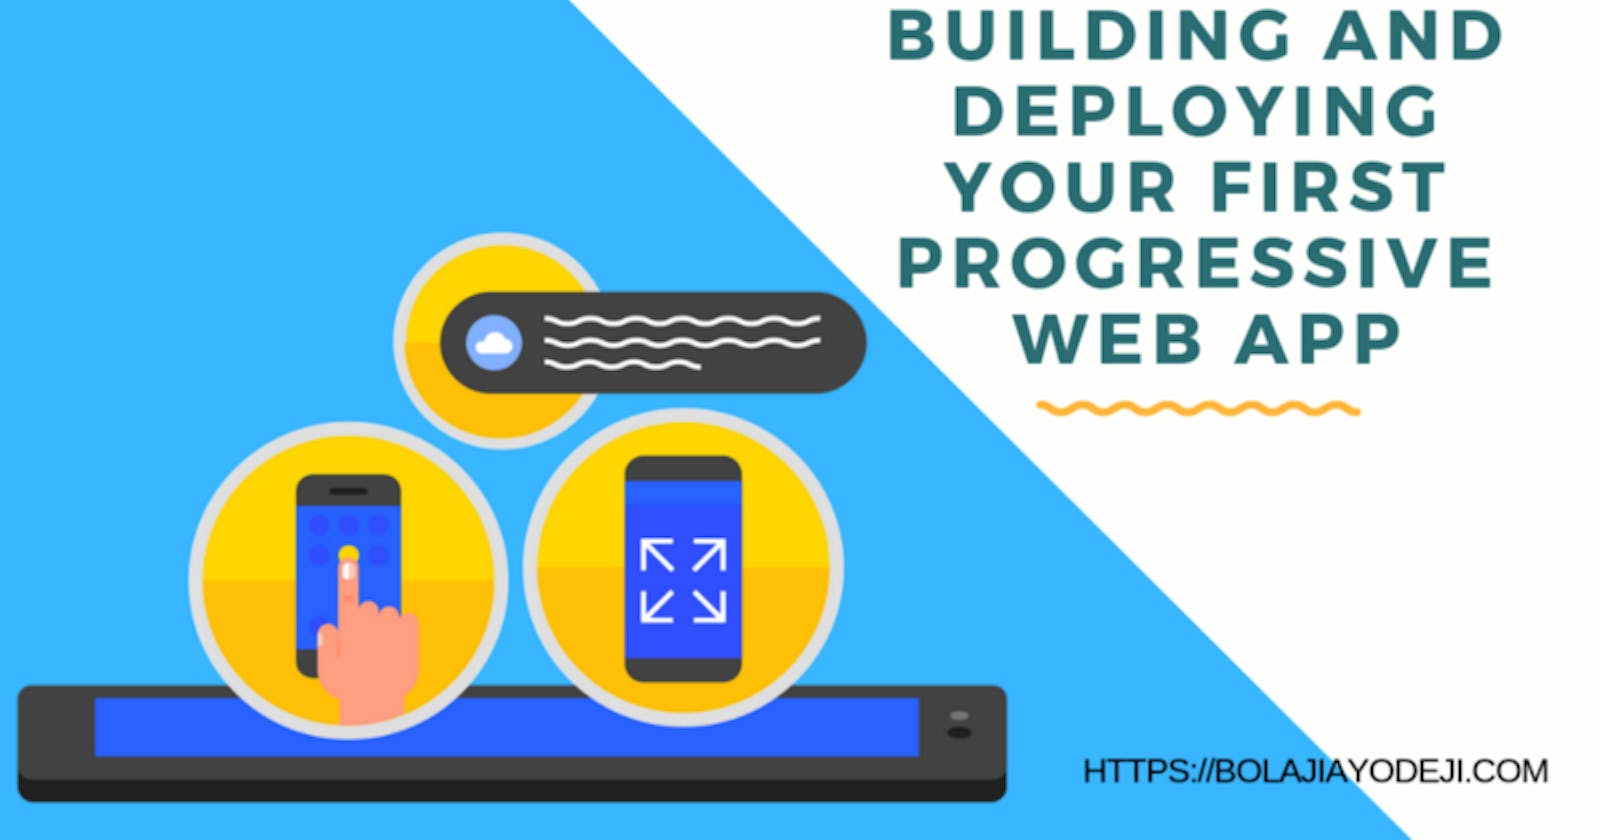 Building & Deploying your First Progressive Web App